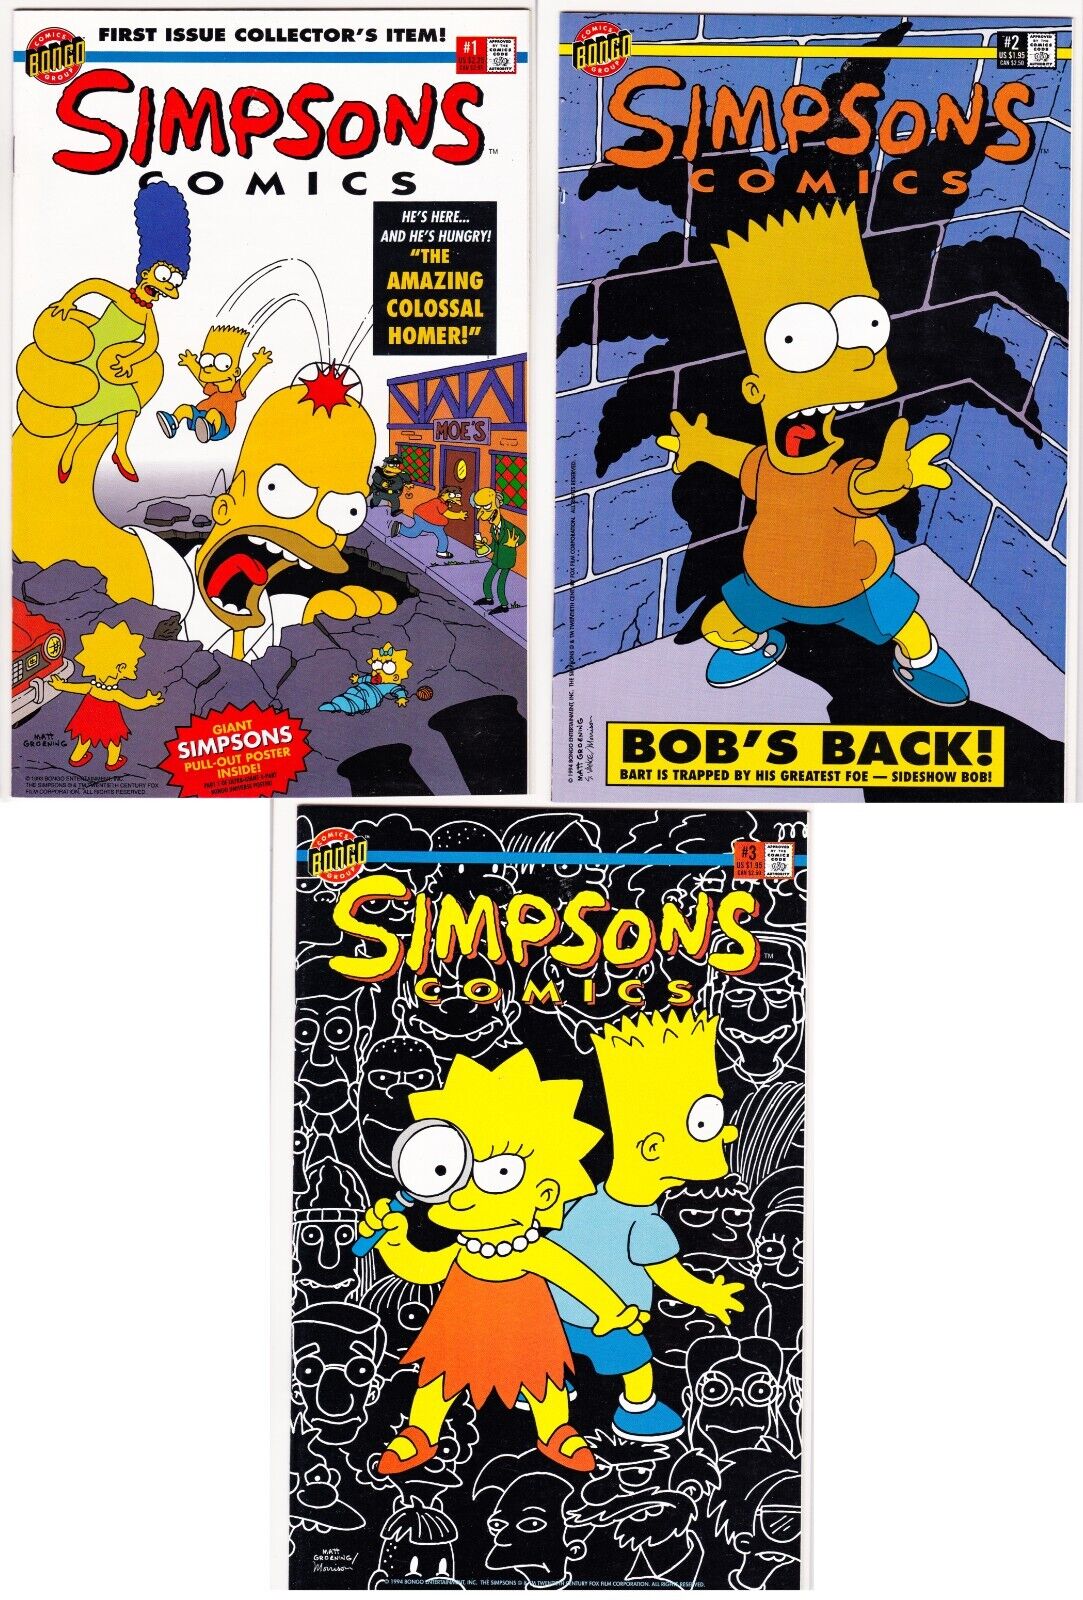 SIMPSONS COMICS #1 2 3 HOT 1993 NM+/MT 9.6-9.8 Classic Covers & Ready for CGC